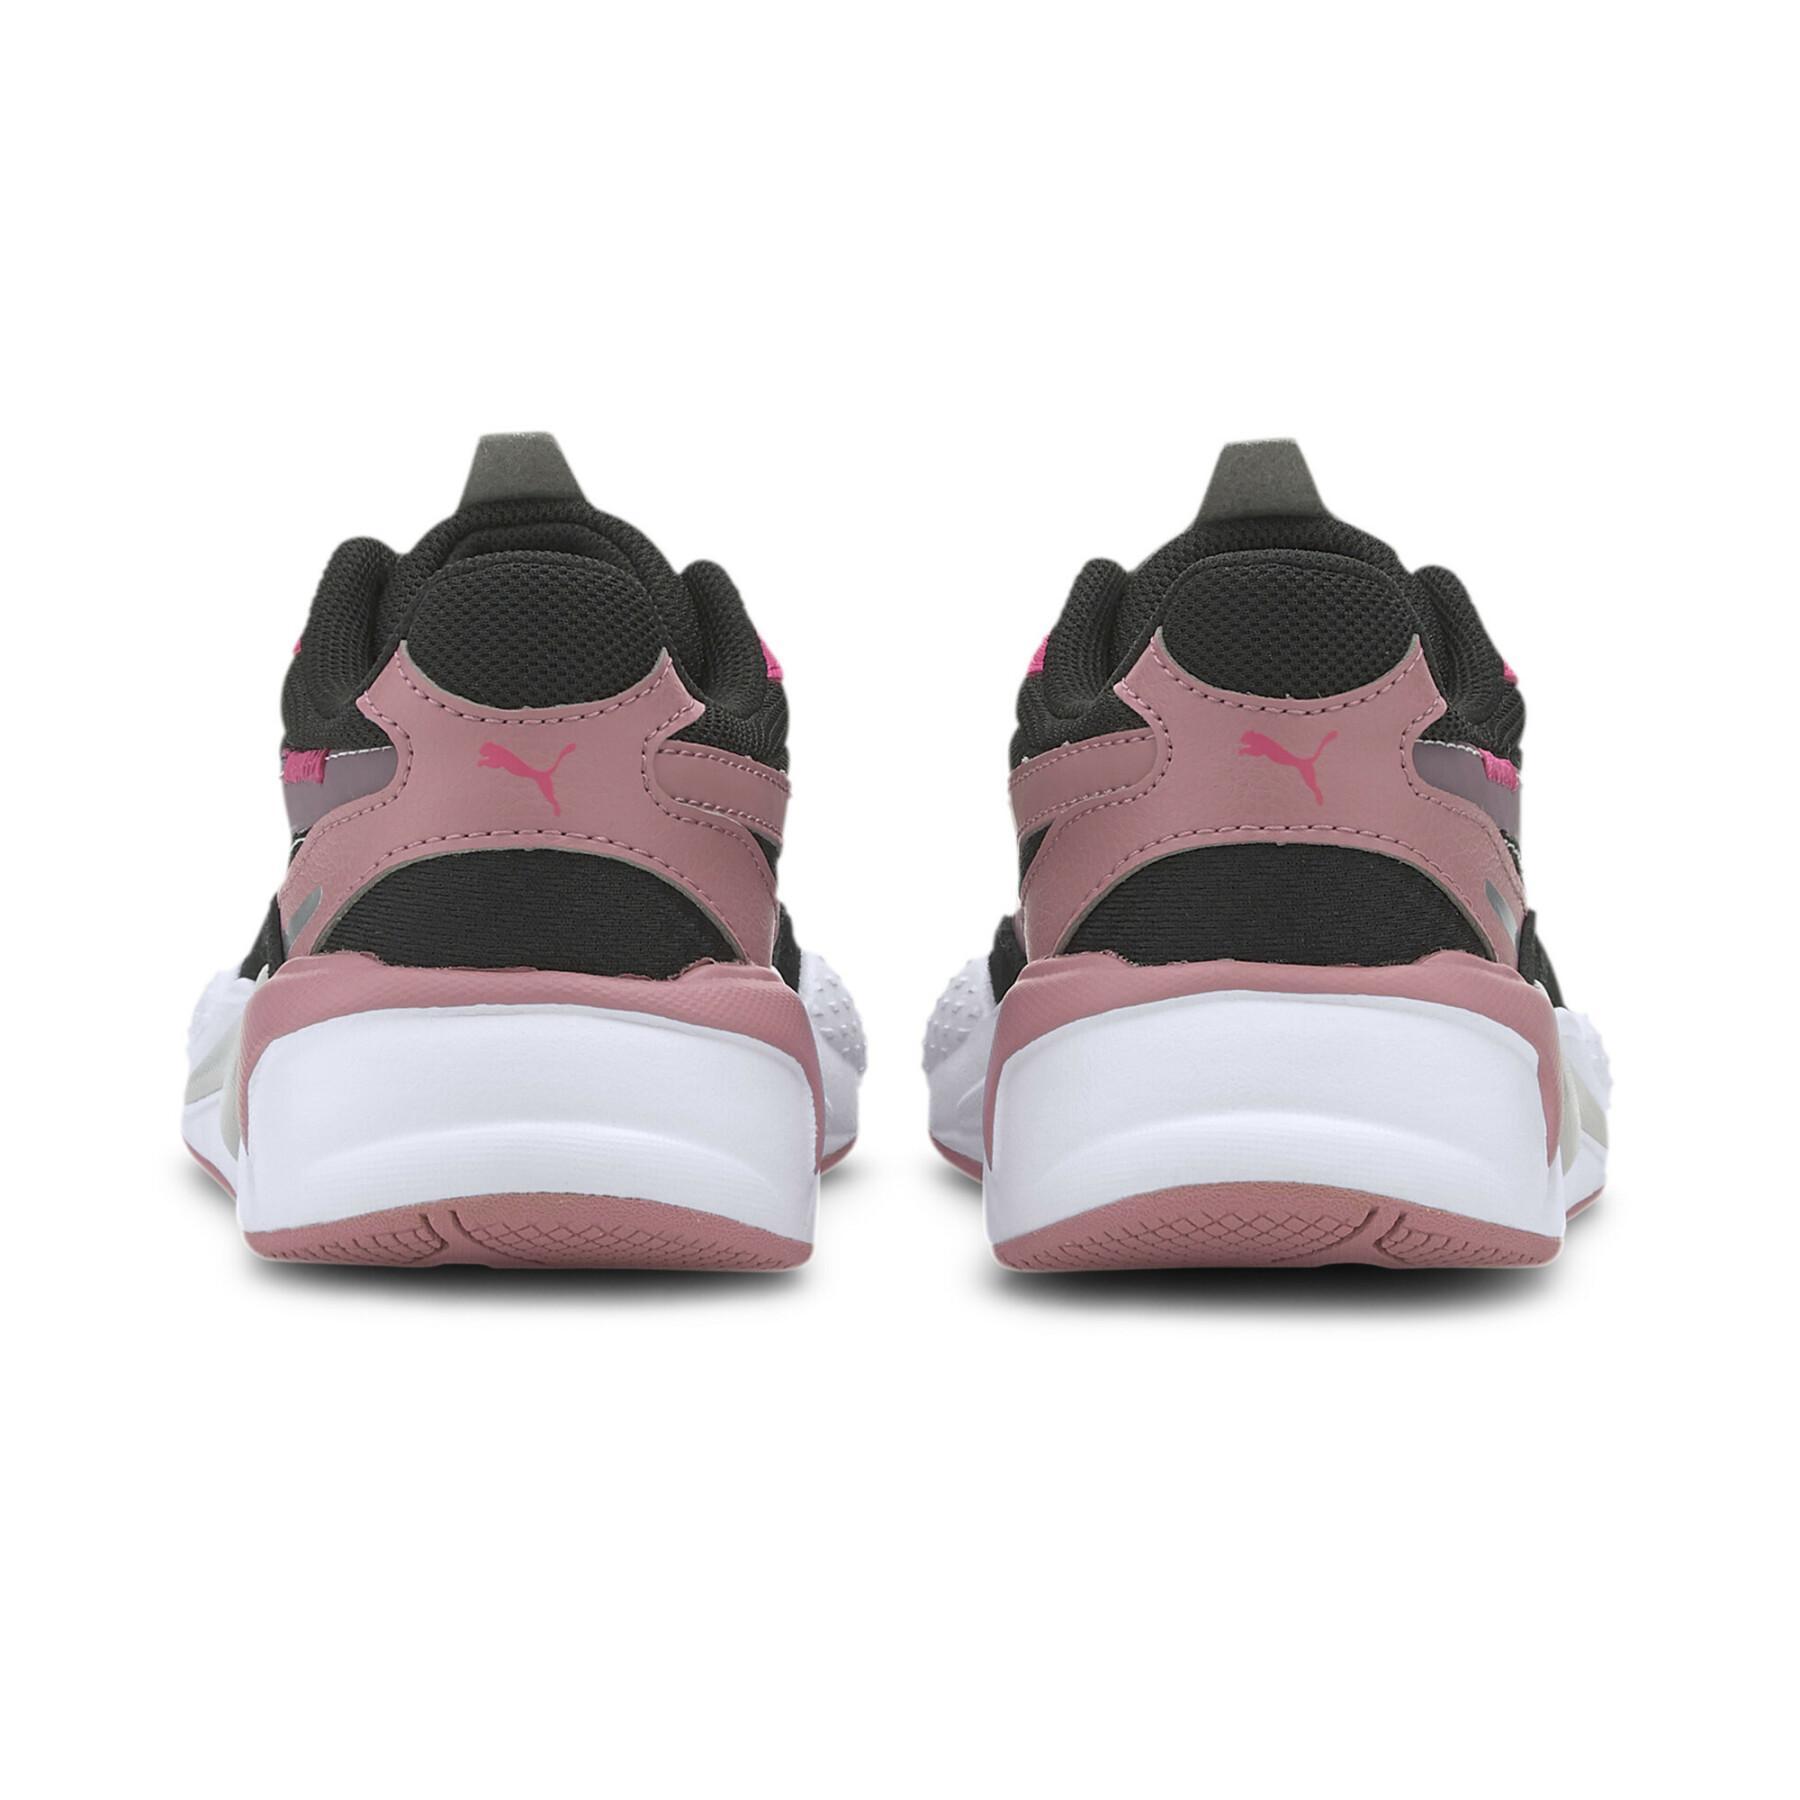 Chaussures enfant Puma RS-X³ City Attack PS